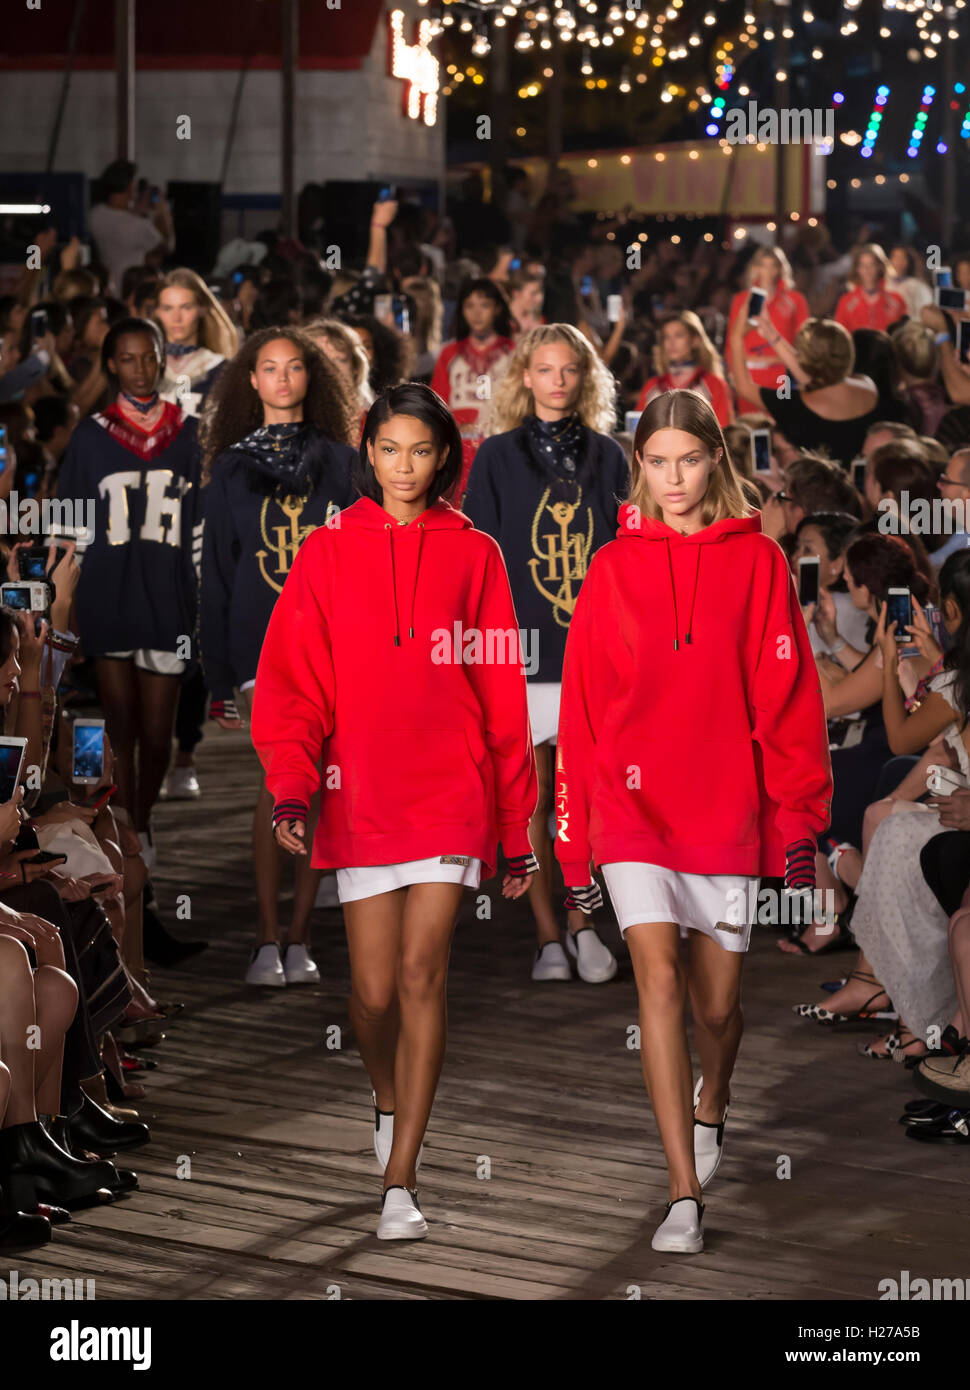 NEW YORK, NY - SEPTEMBER 09, 2016: Chanel Iman and Josephine Skriver walk  the runway at Tommy Hilfiger Women's Fashion Show Stock Photo - Alamy